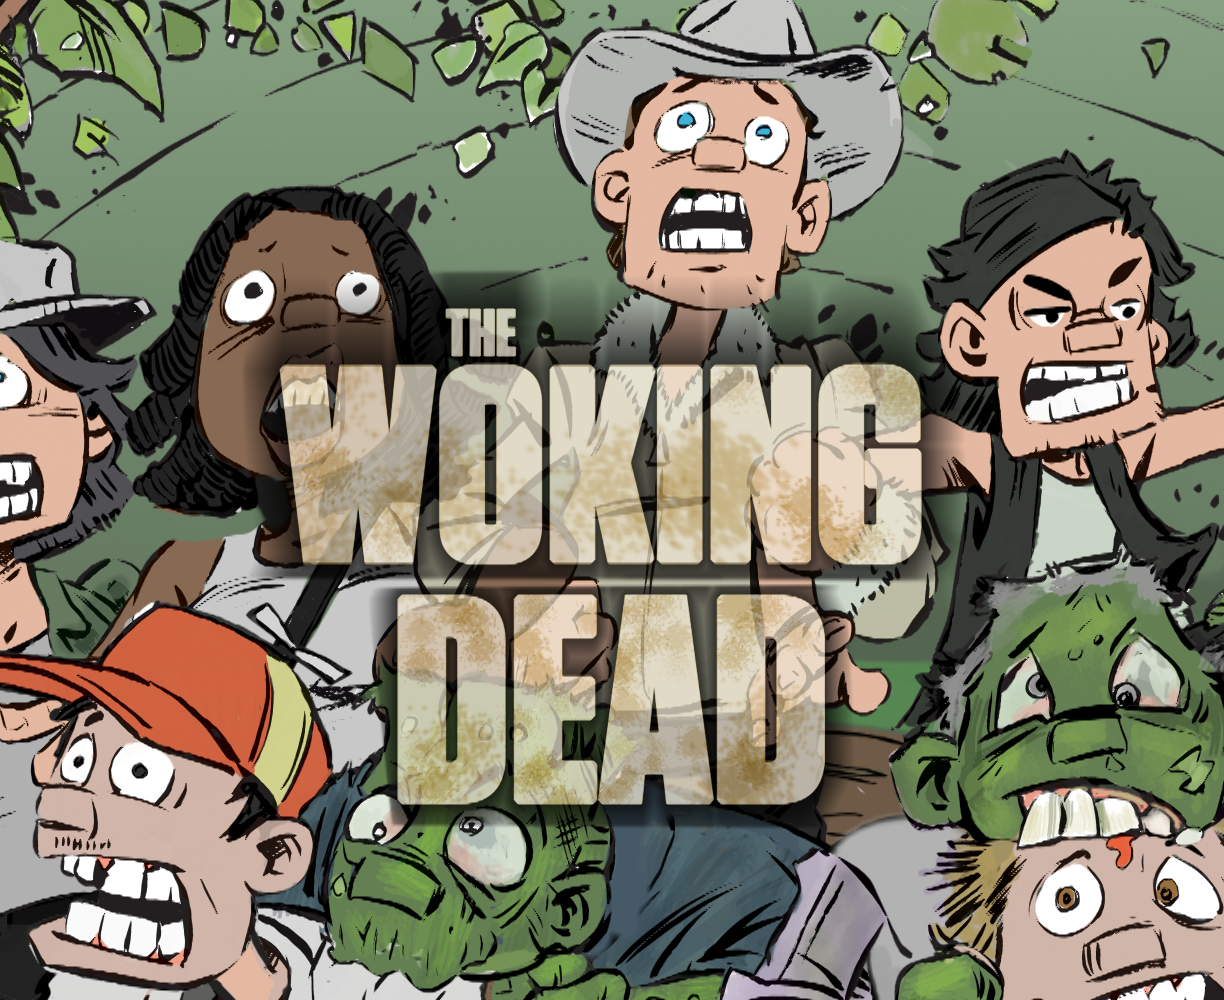 The Woking Dead 2 episode cover